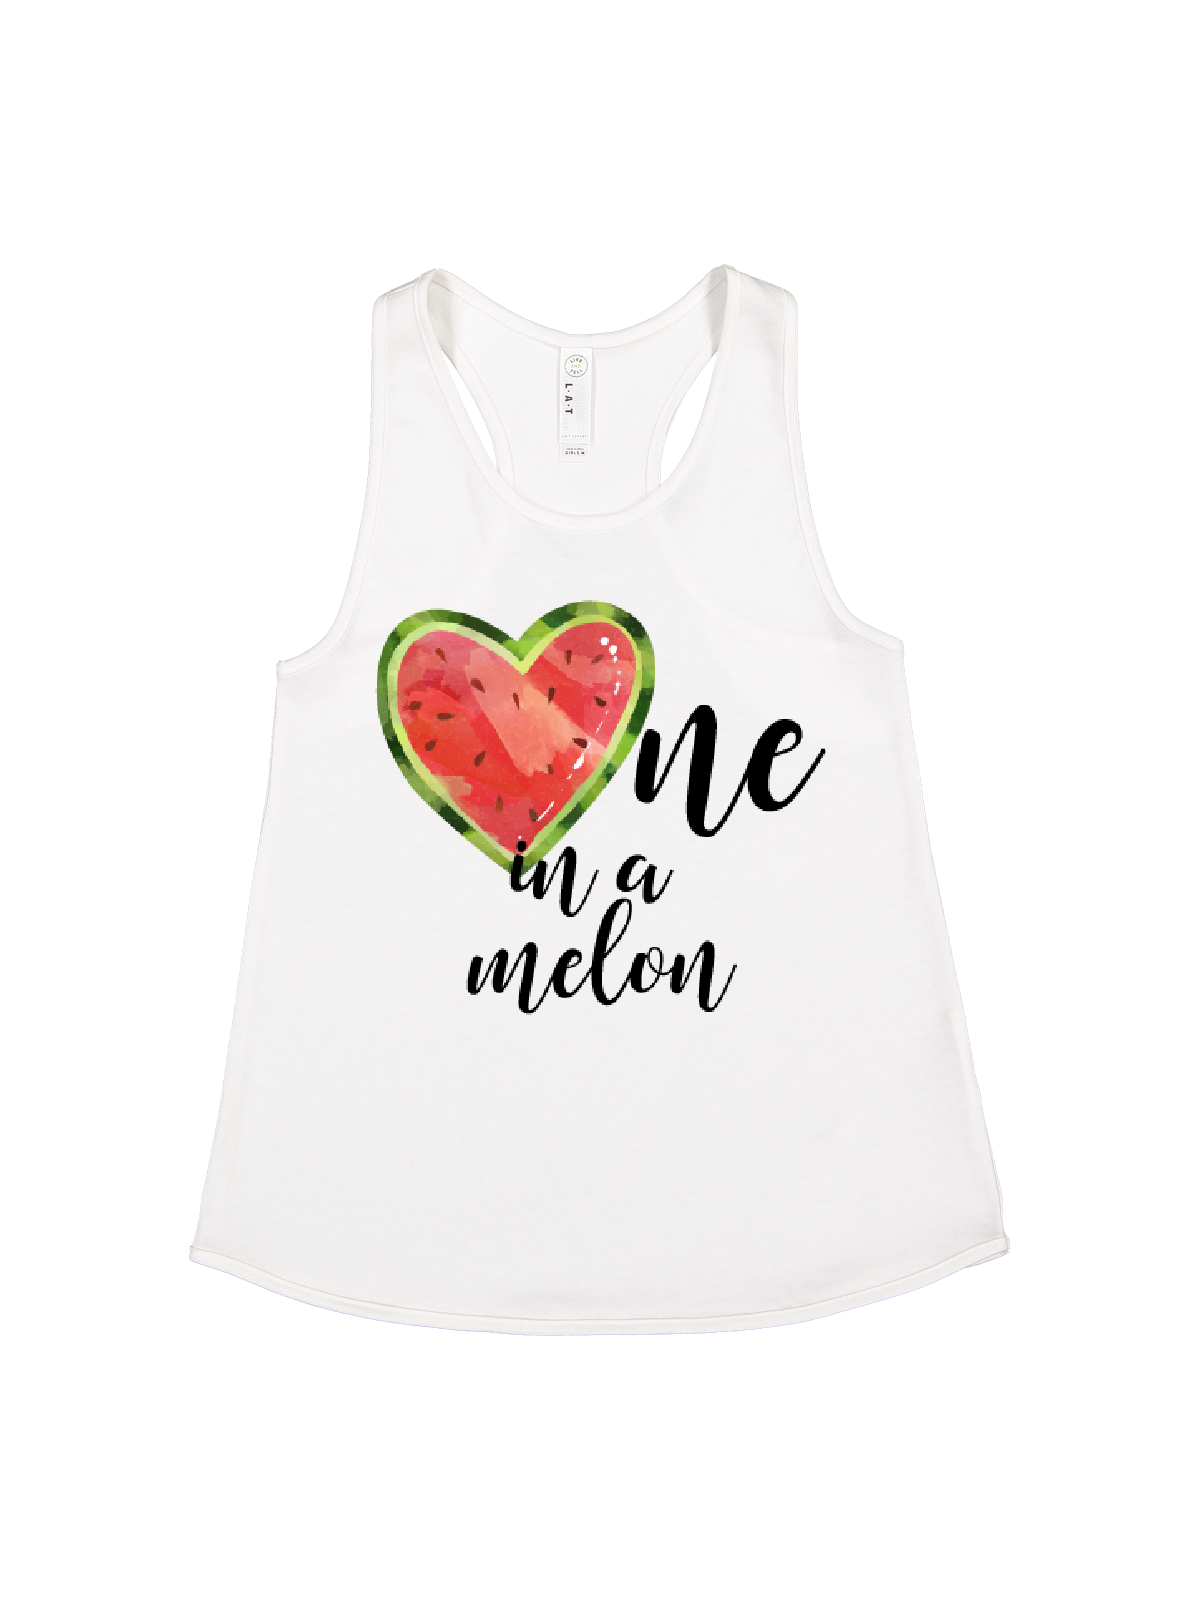 one in a melon girls white tank top